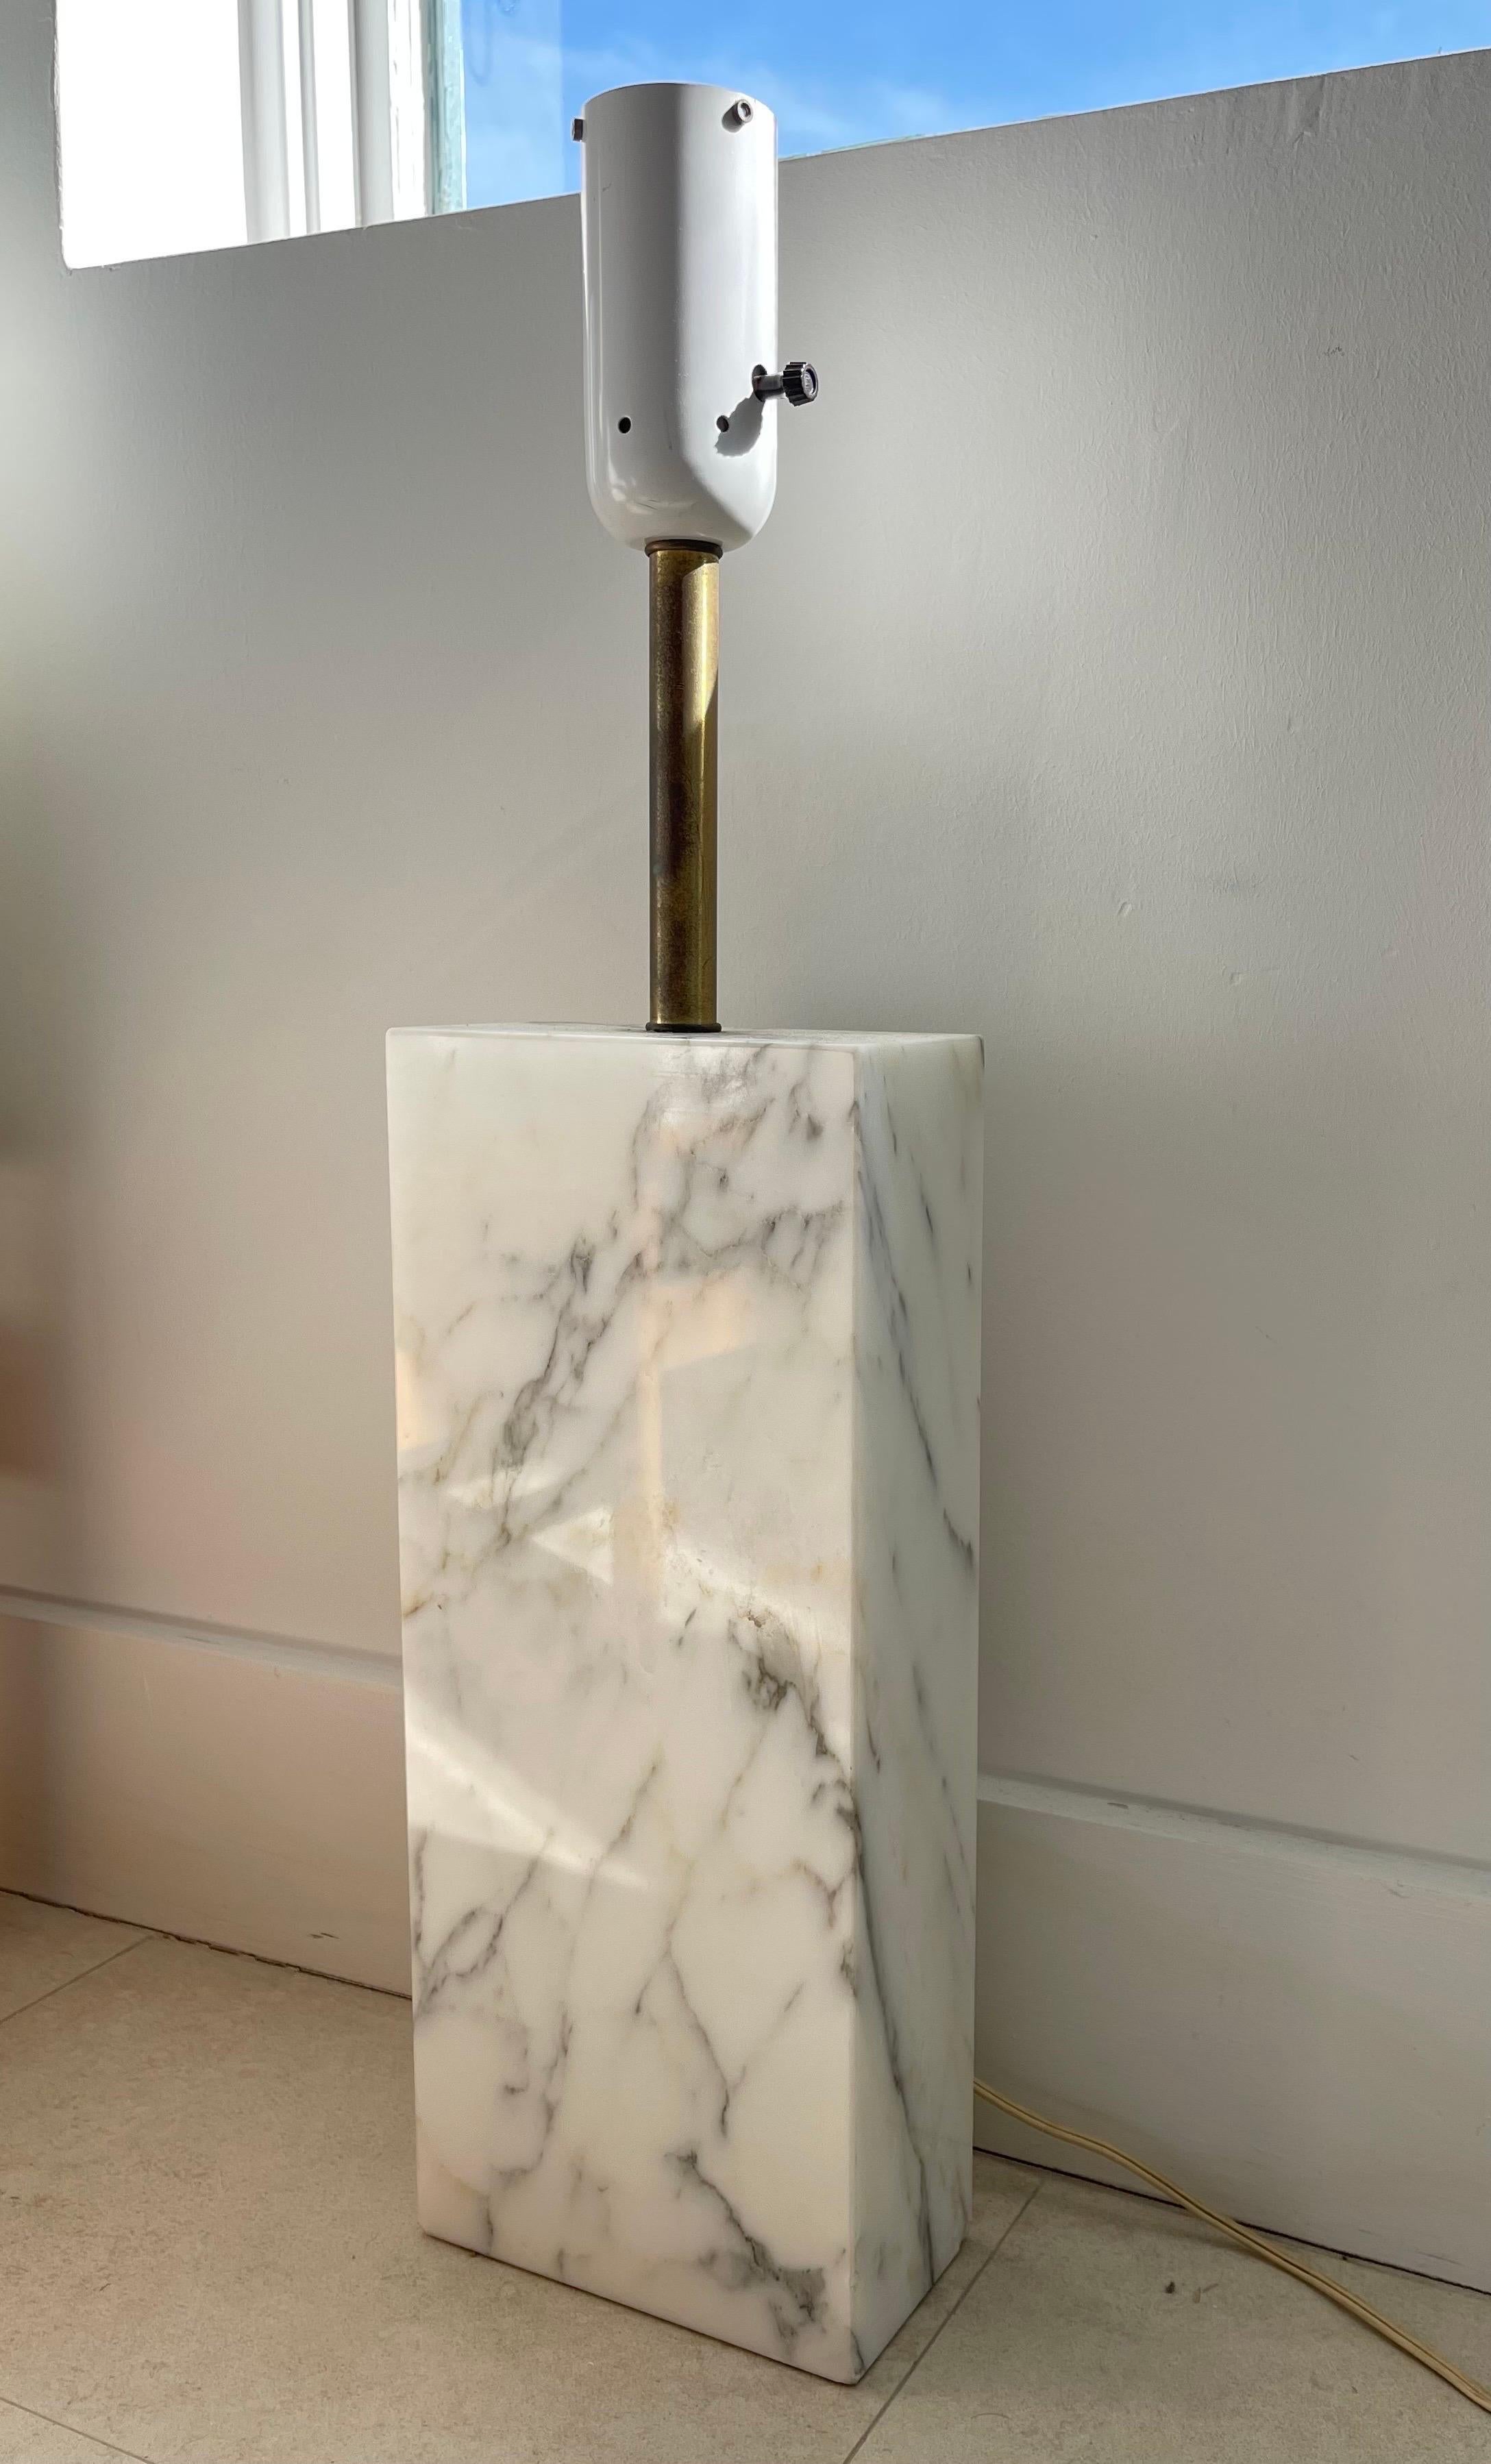 Monolithic statuary marble table lamp, rendered in a solid slab of polished statuary marble with Brass and powder coated fixturing, designed by Elizabeth Kauffer for Nessen Studio Lighting, circa 1950s.

This lamp is is one of two in an unmatched